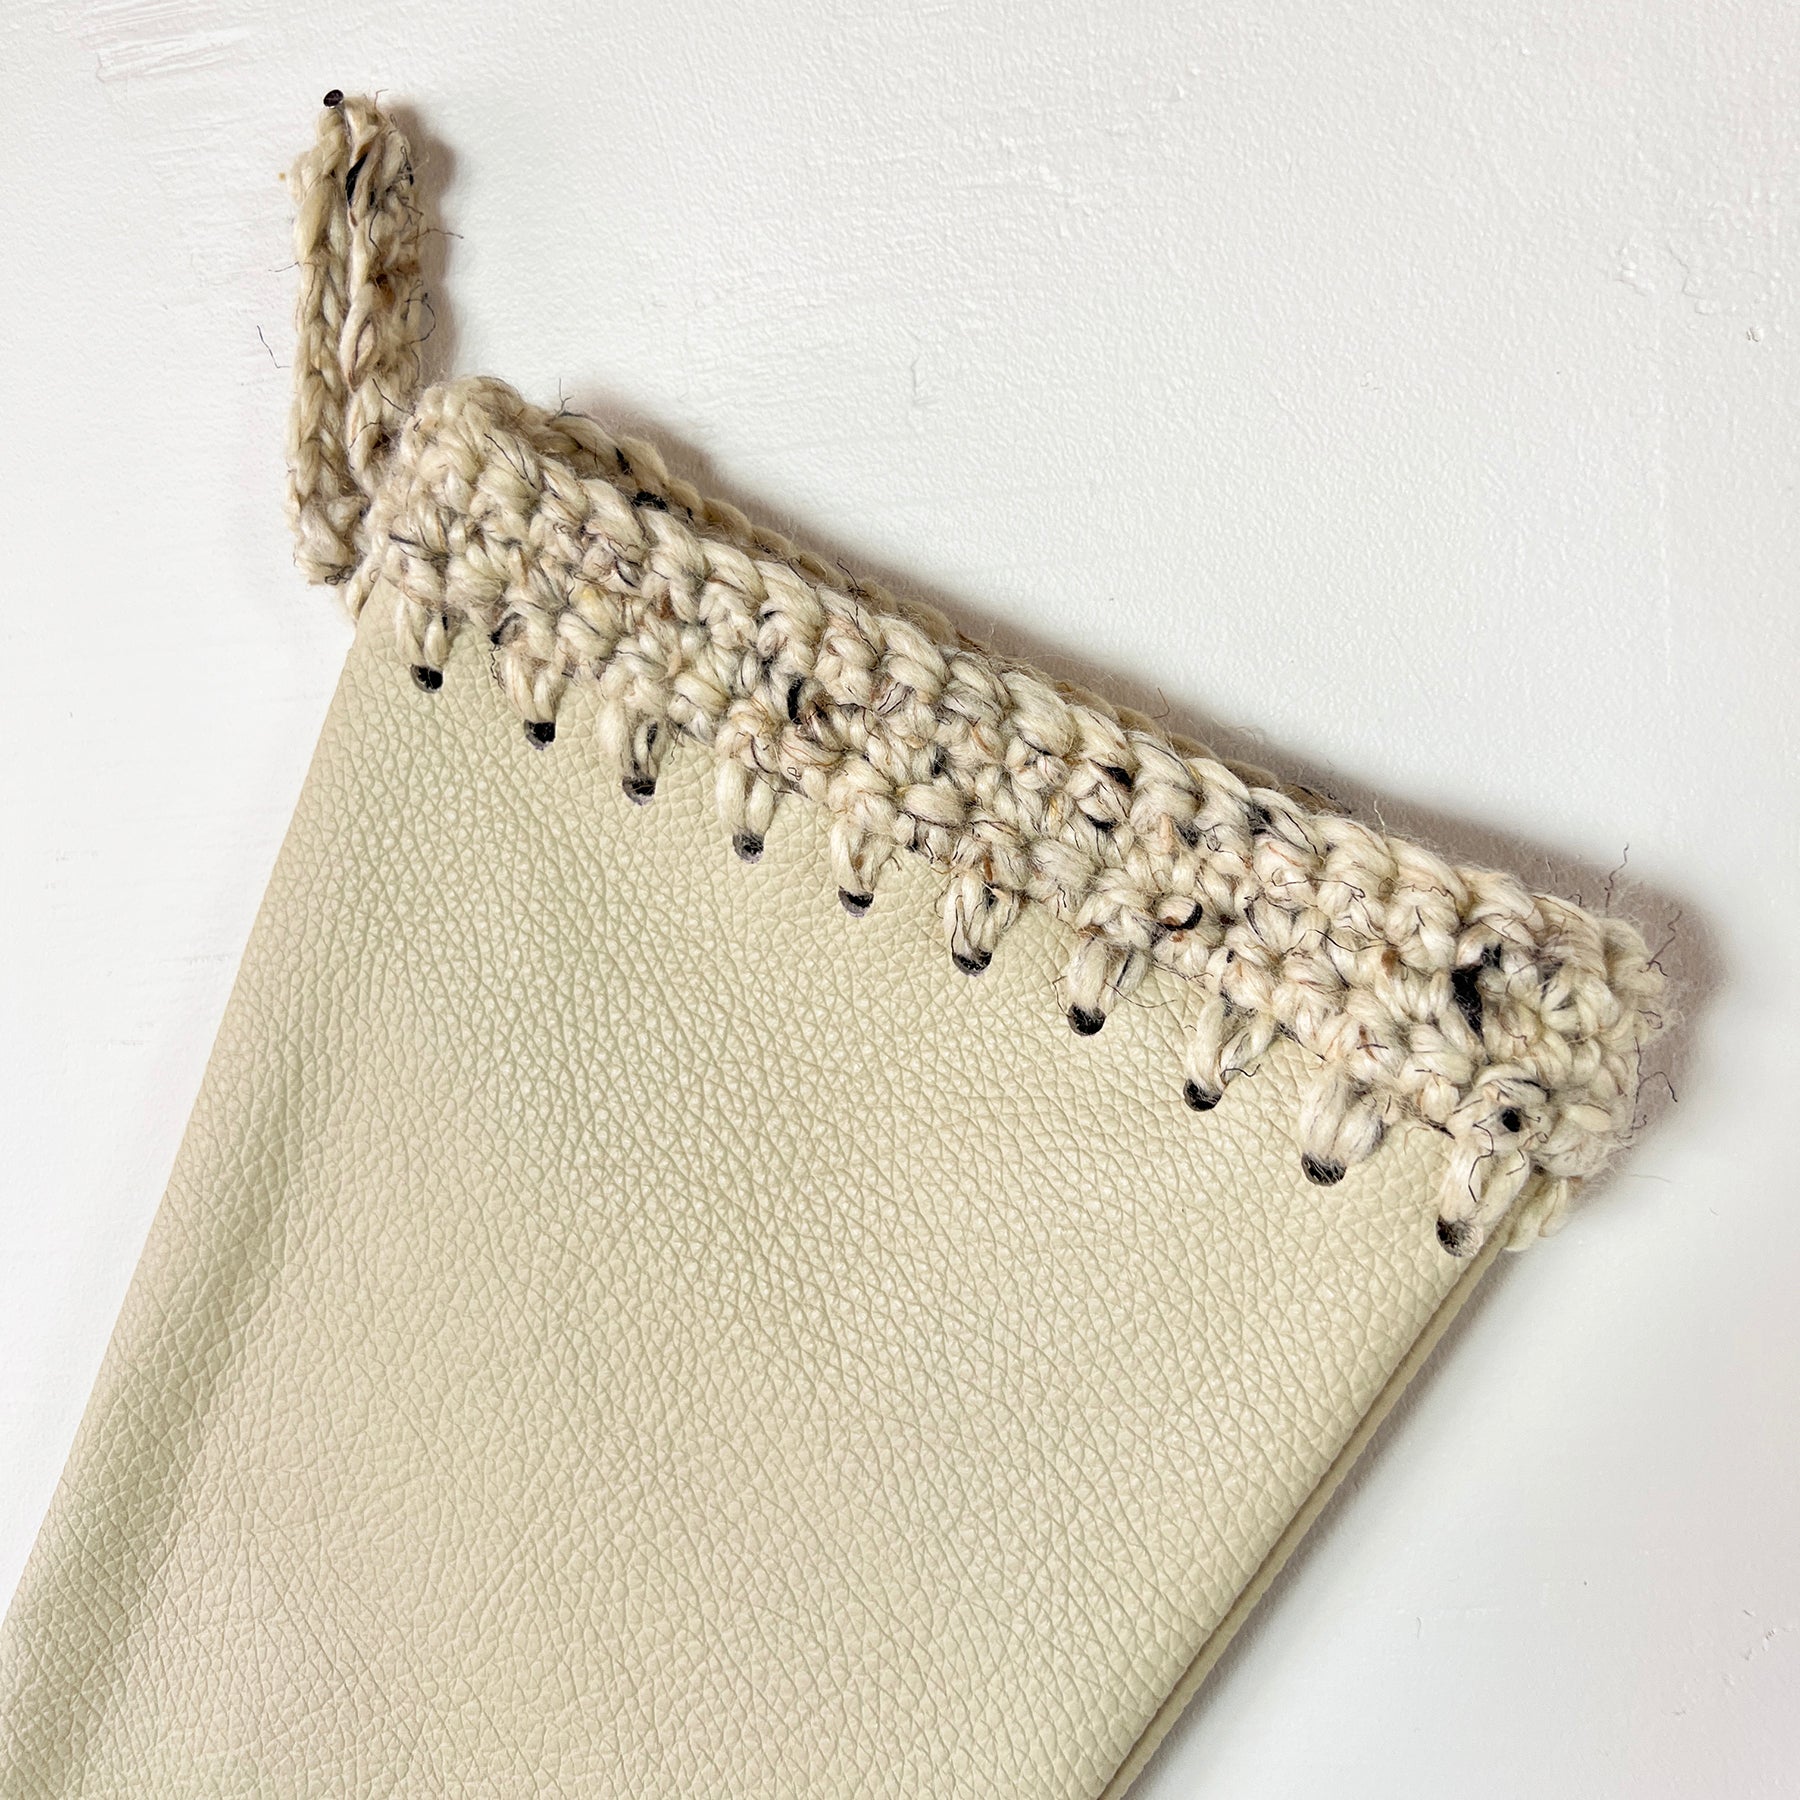 Sand Leather with Hand Crochet Trim Christmas Stocking